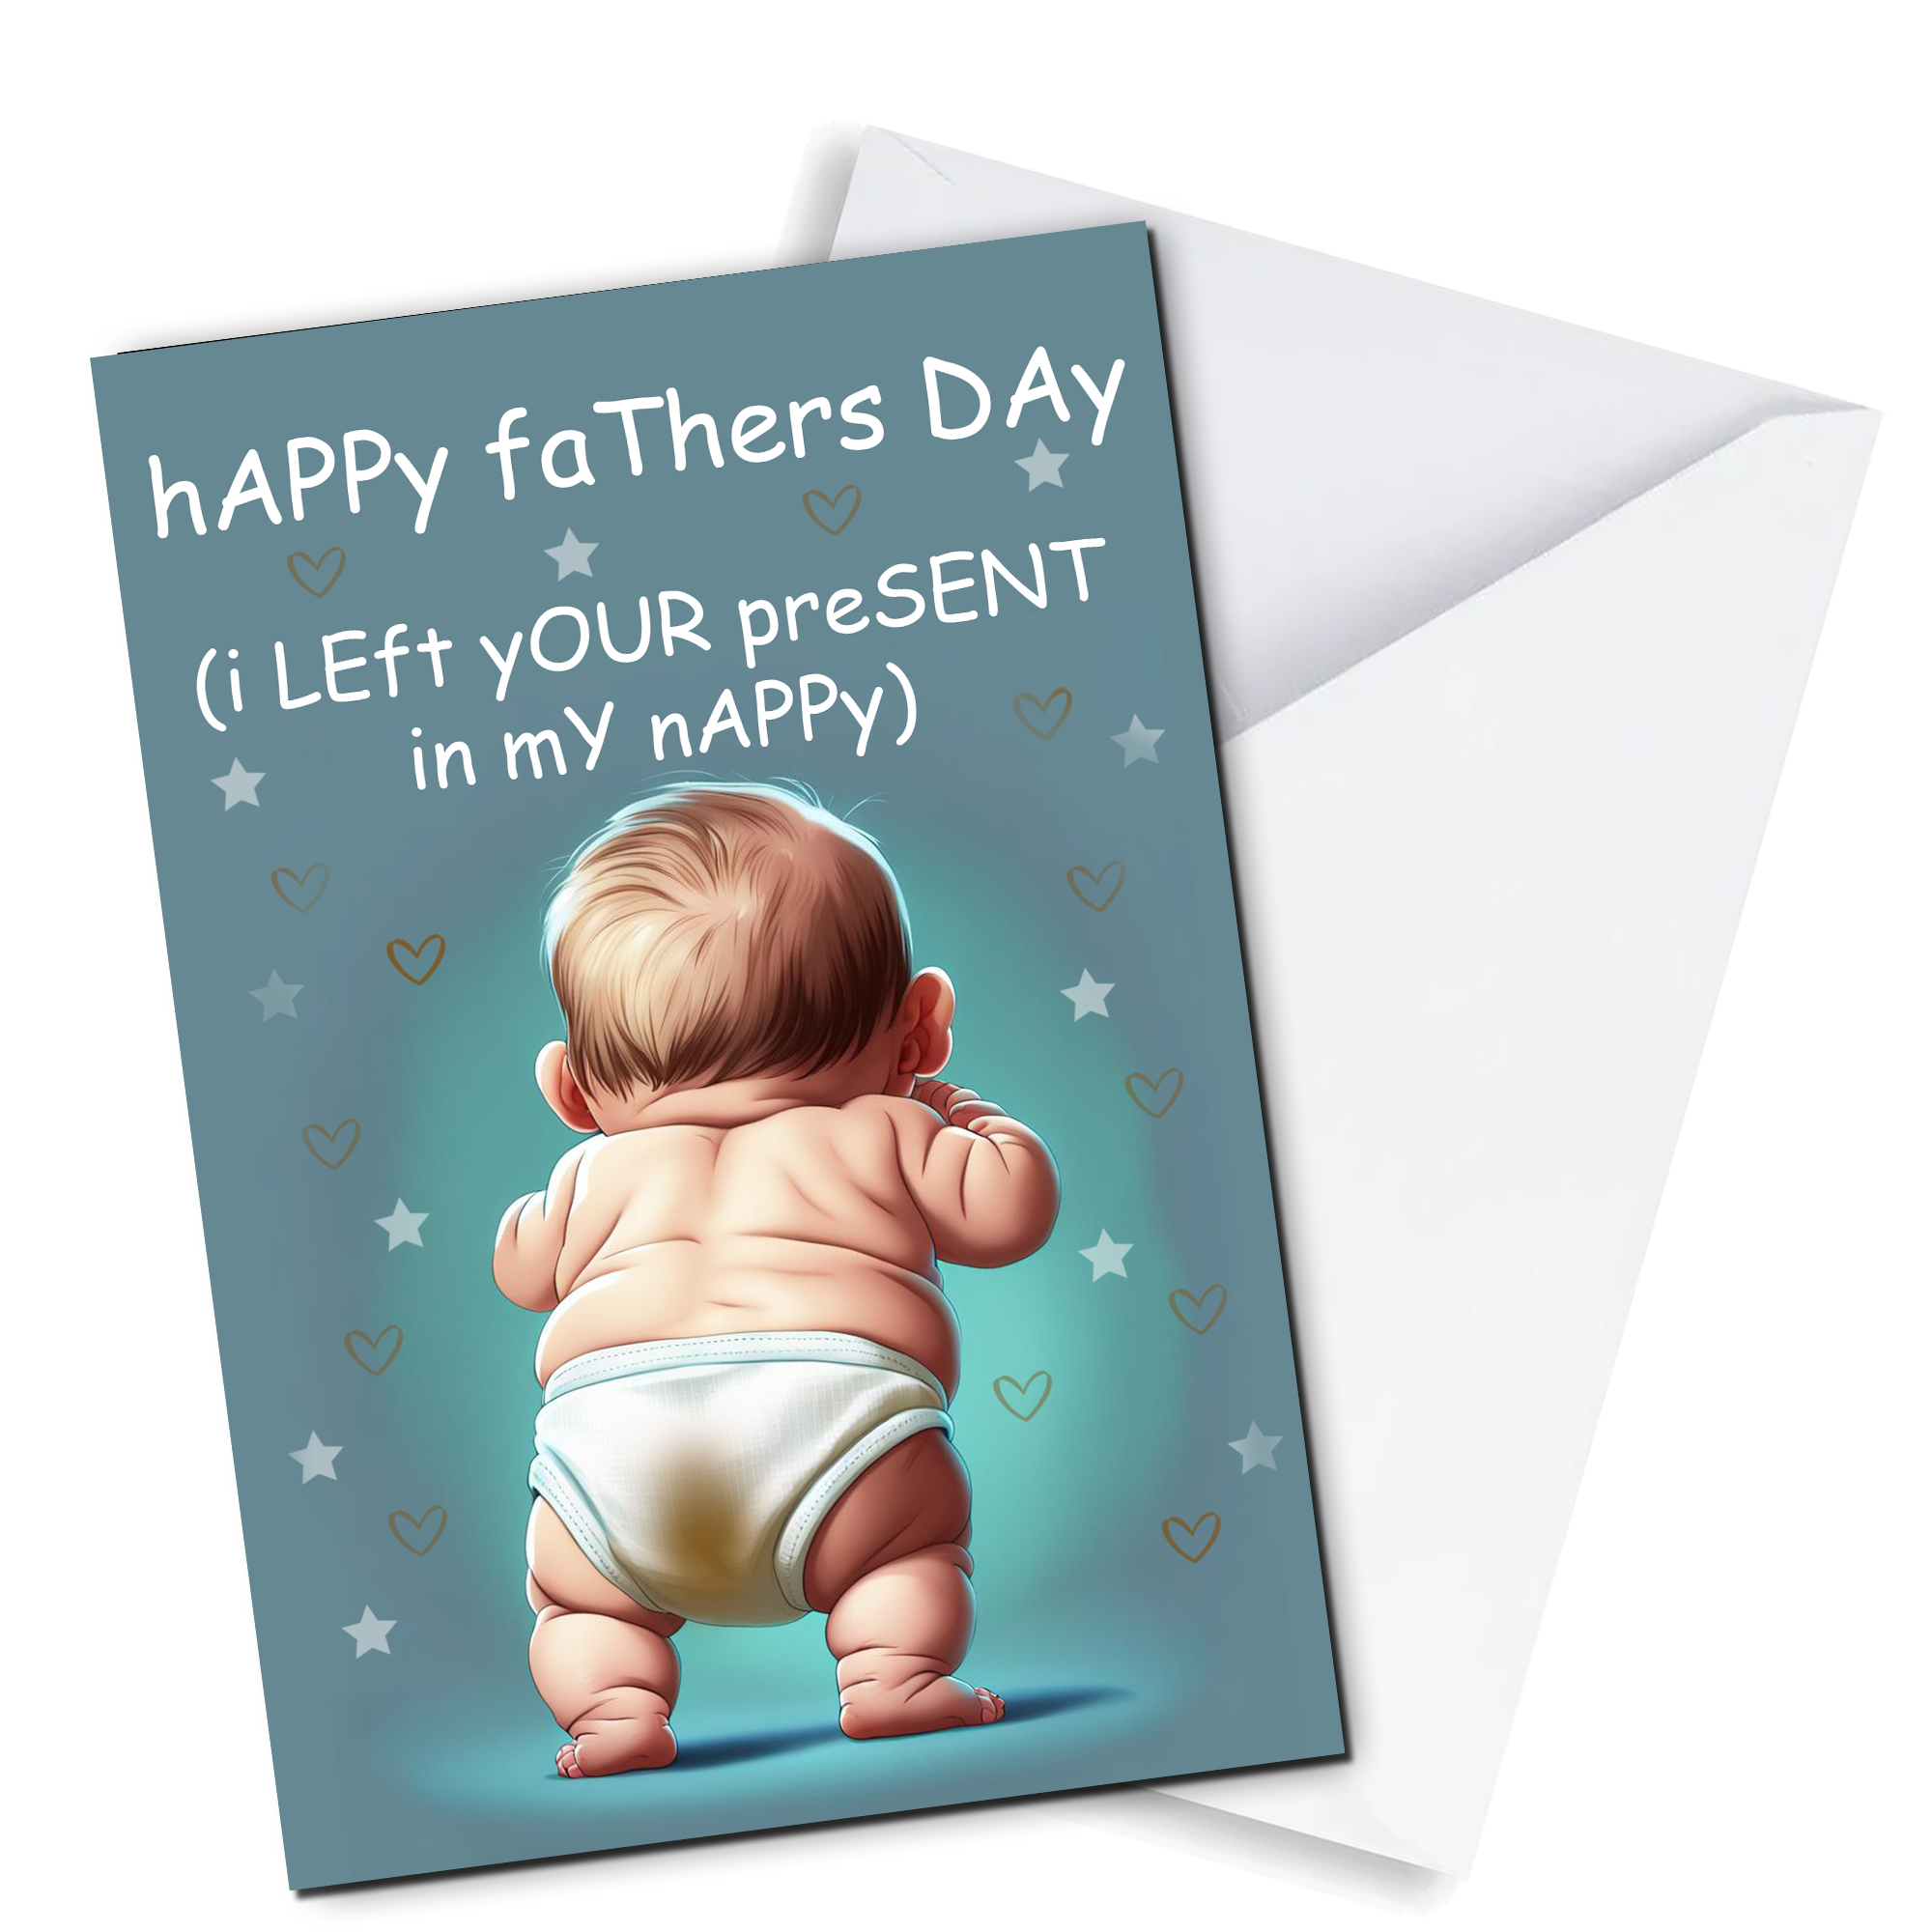 Funny Card For Dad Fathers Day Card Light Hearted Fun From Son Daughter Baby Nappy